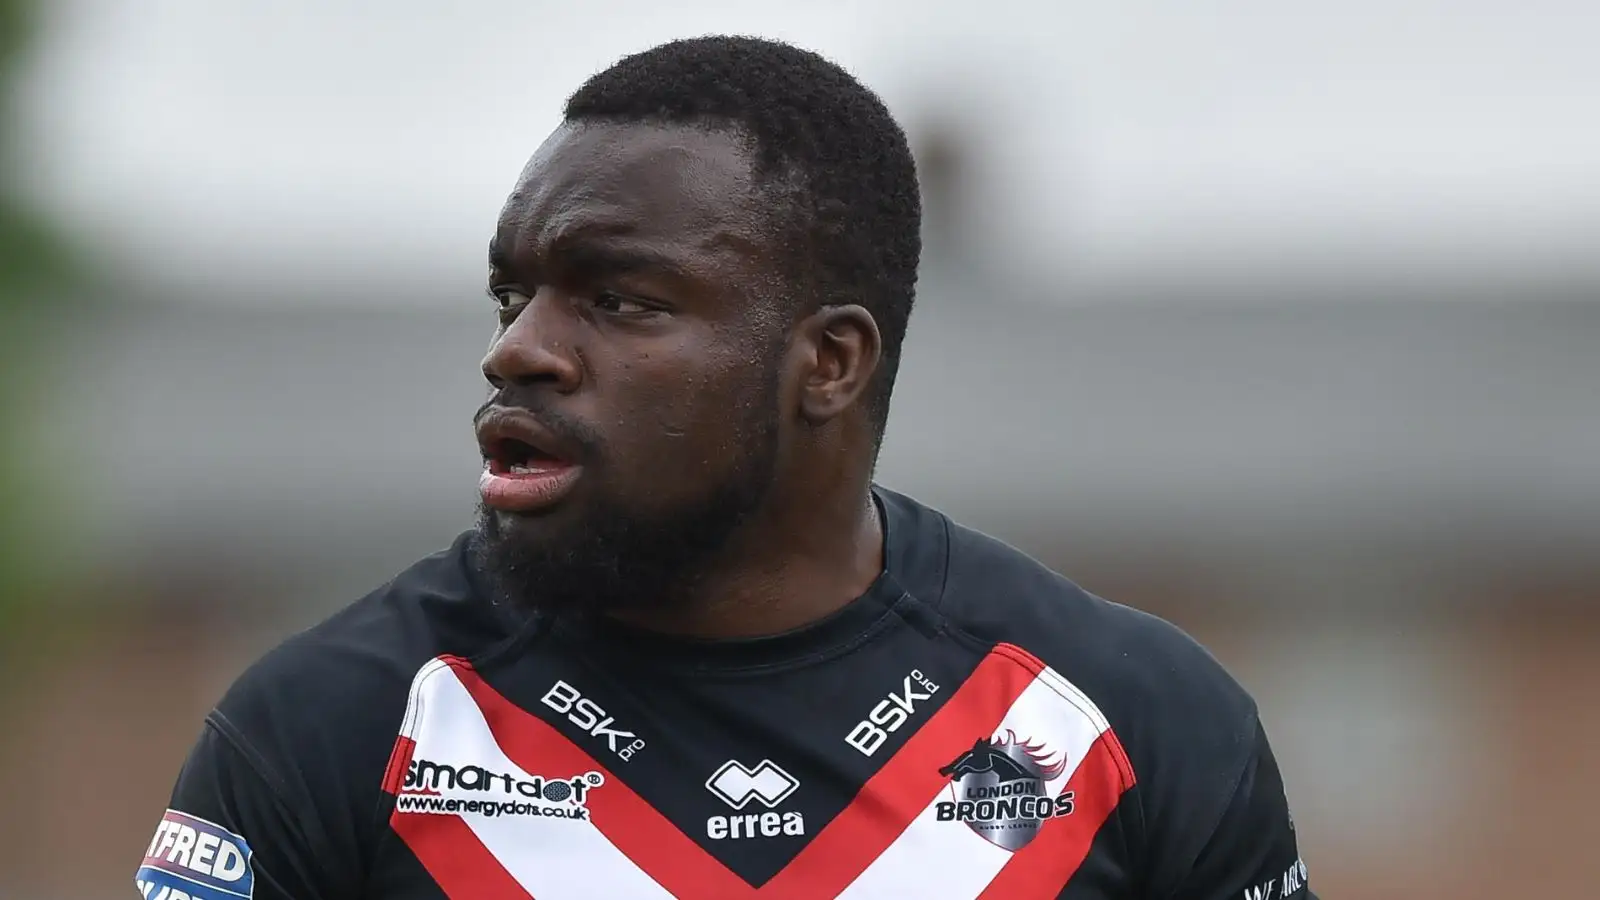 London Broncos make first signing ahead of Super League return as international forward rejoins boyhood club: ‘Time is right for me to return home’